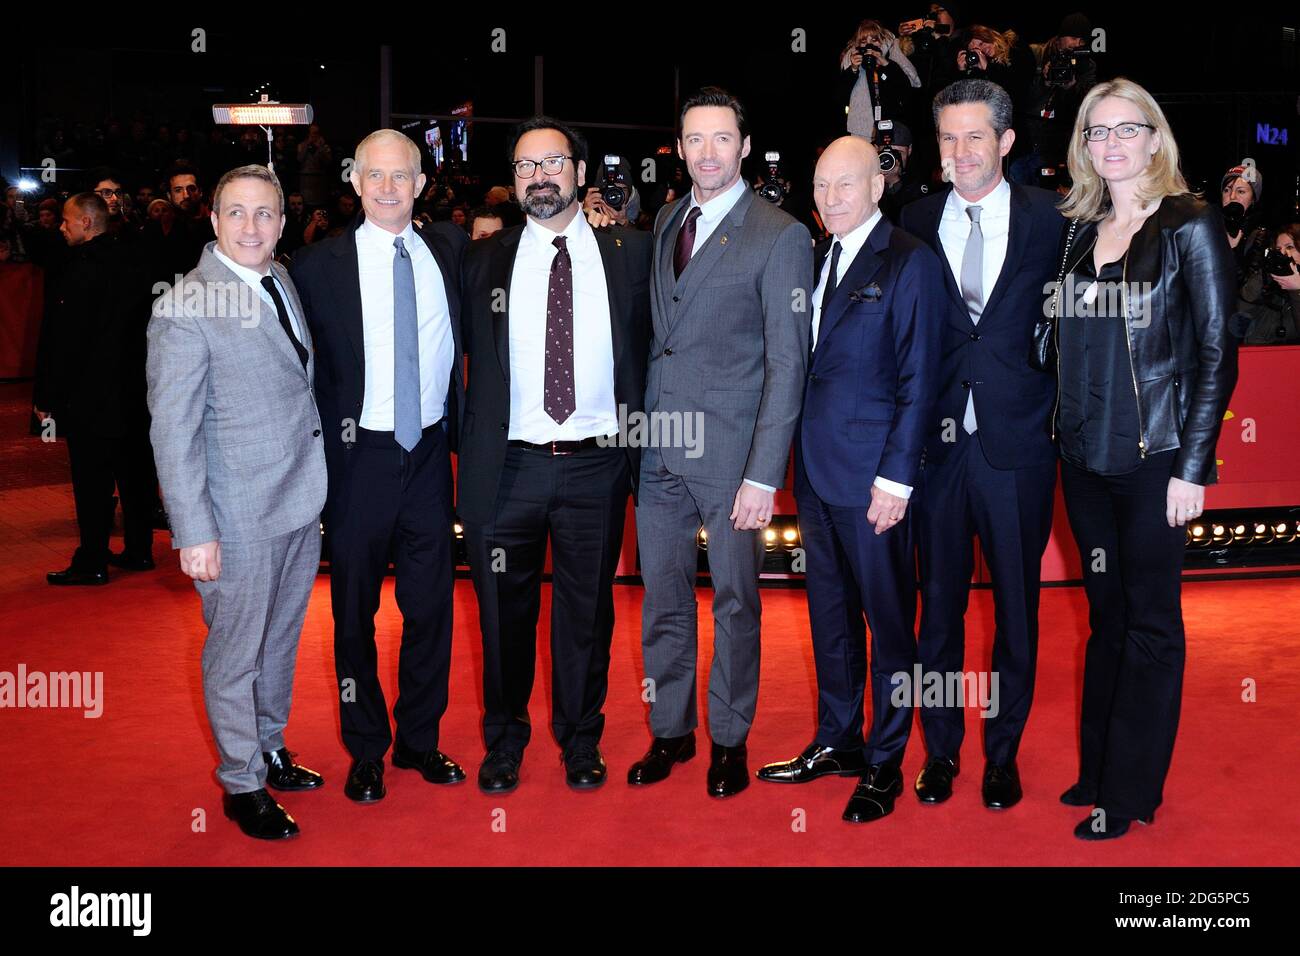 Hutch Parker, Simon Kinberg, James Mangold, Patrick Stewart and Hugh Jackman attending the Logan Premiere during the 67th Berlin International Film Festival (Berlinale) in Berlin, Germany on Februay 17, 2017. Photo by Aurore Marechal/ABACAPRESS.COM Stock Photo